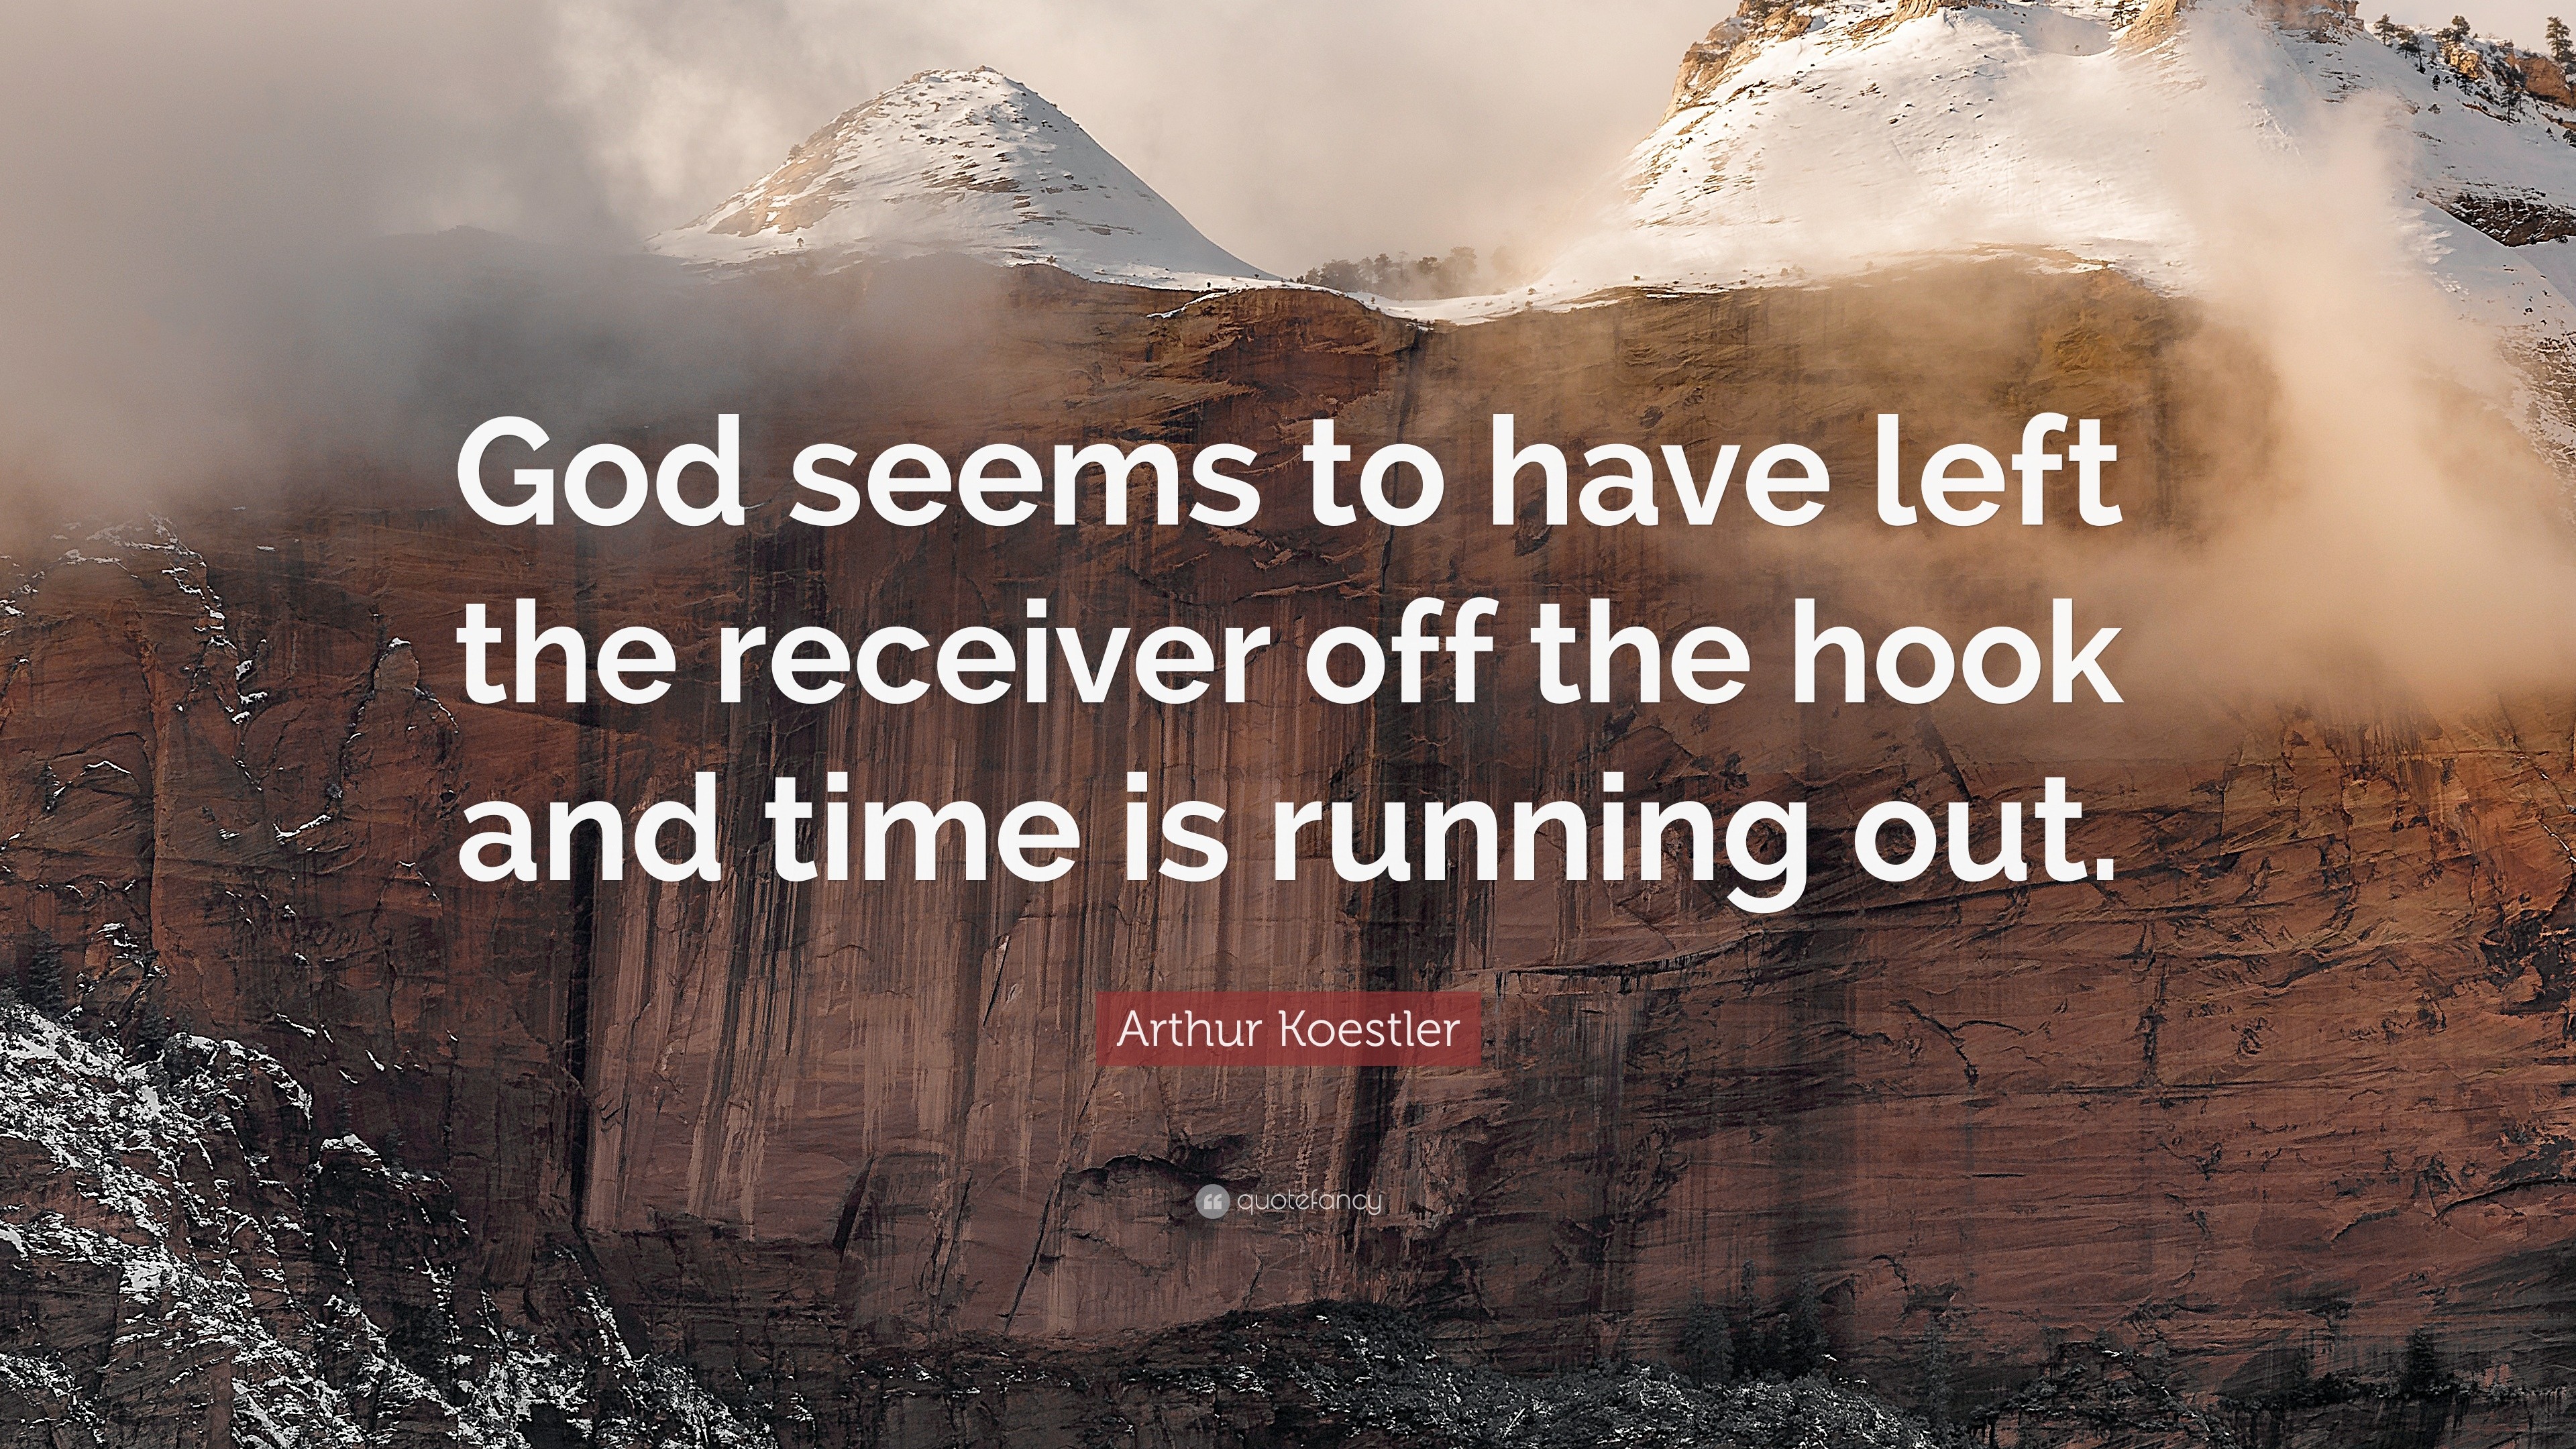 Arthur Koestler Quote “God seems to have left the receiver off the hook and